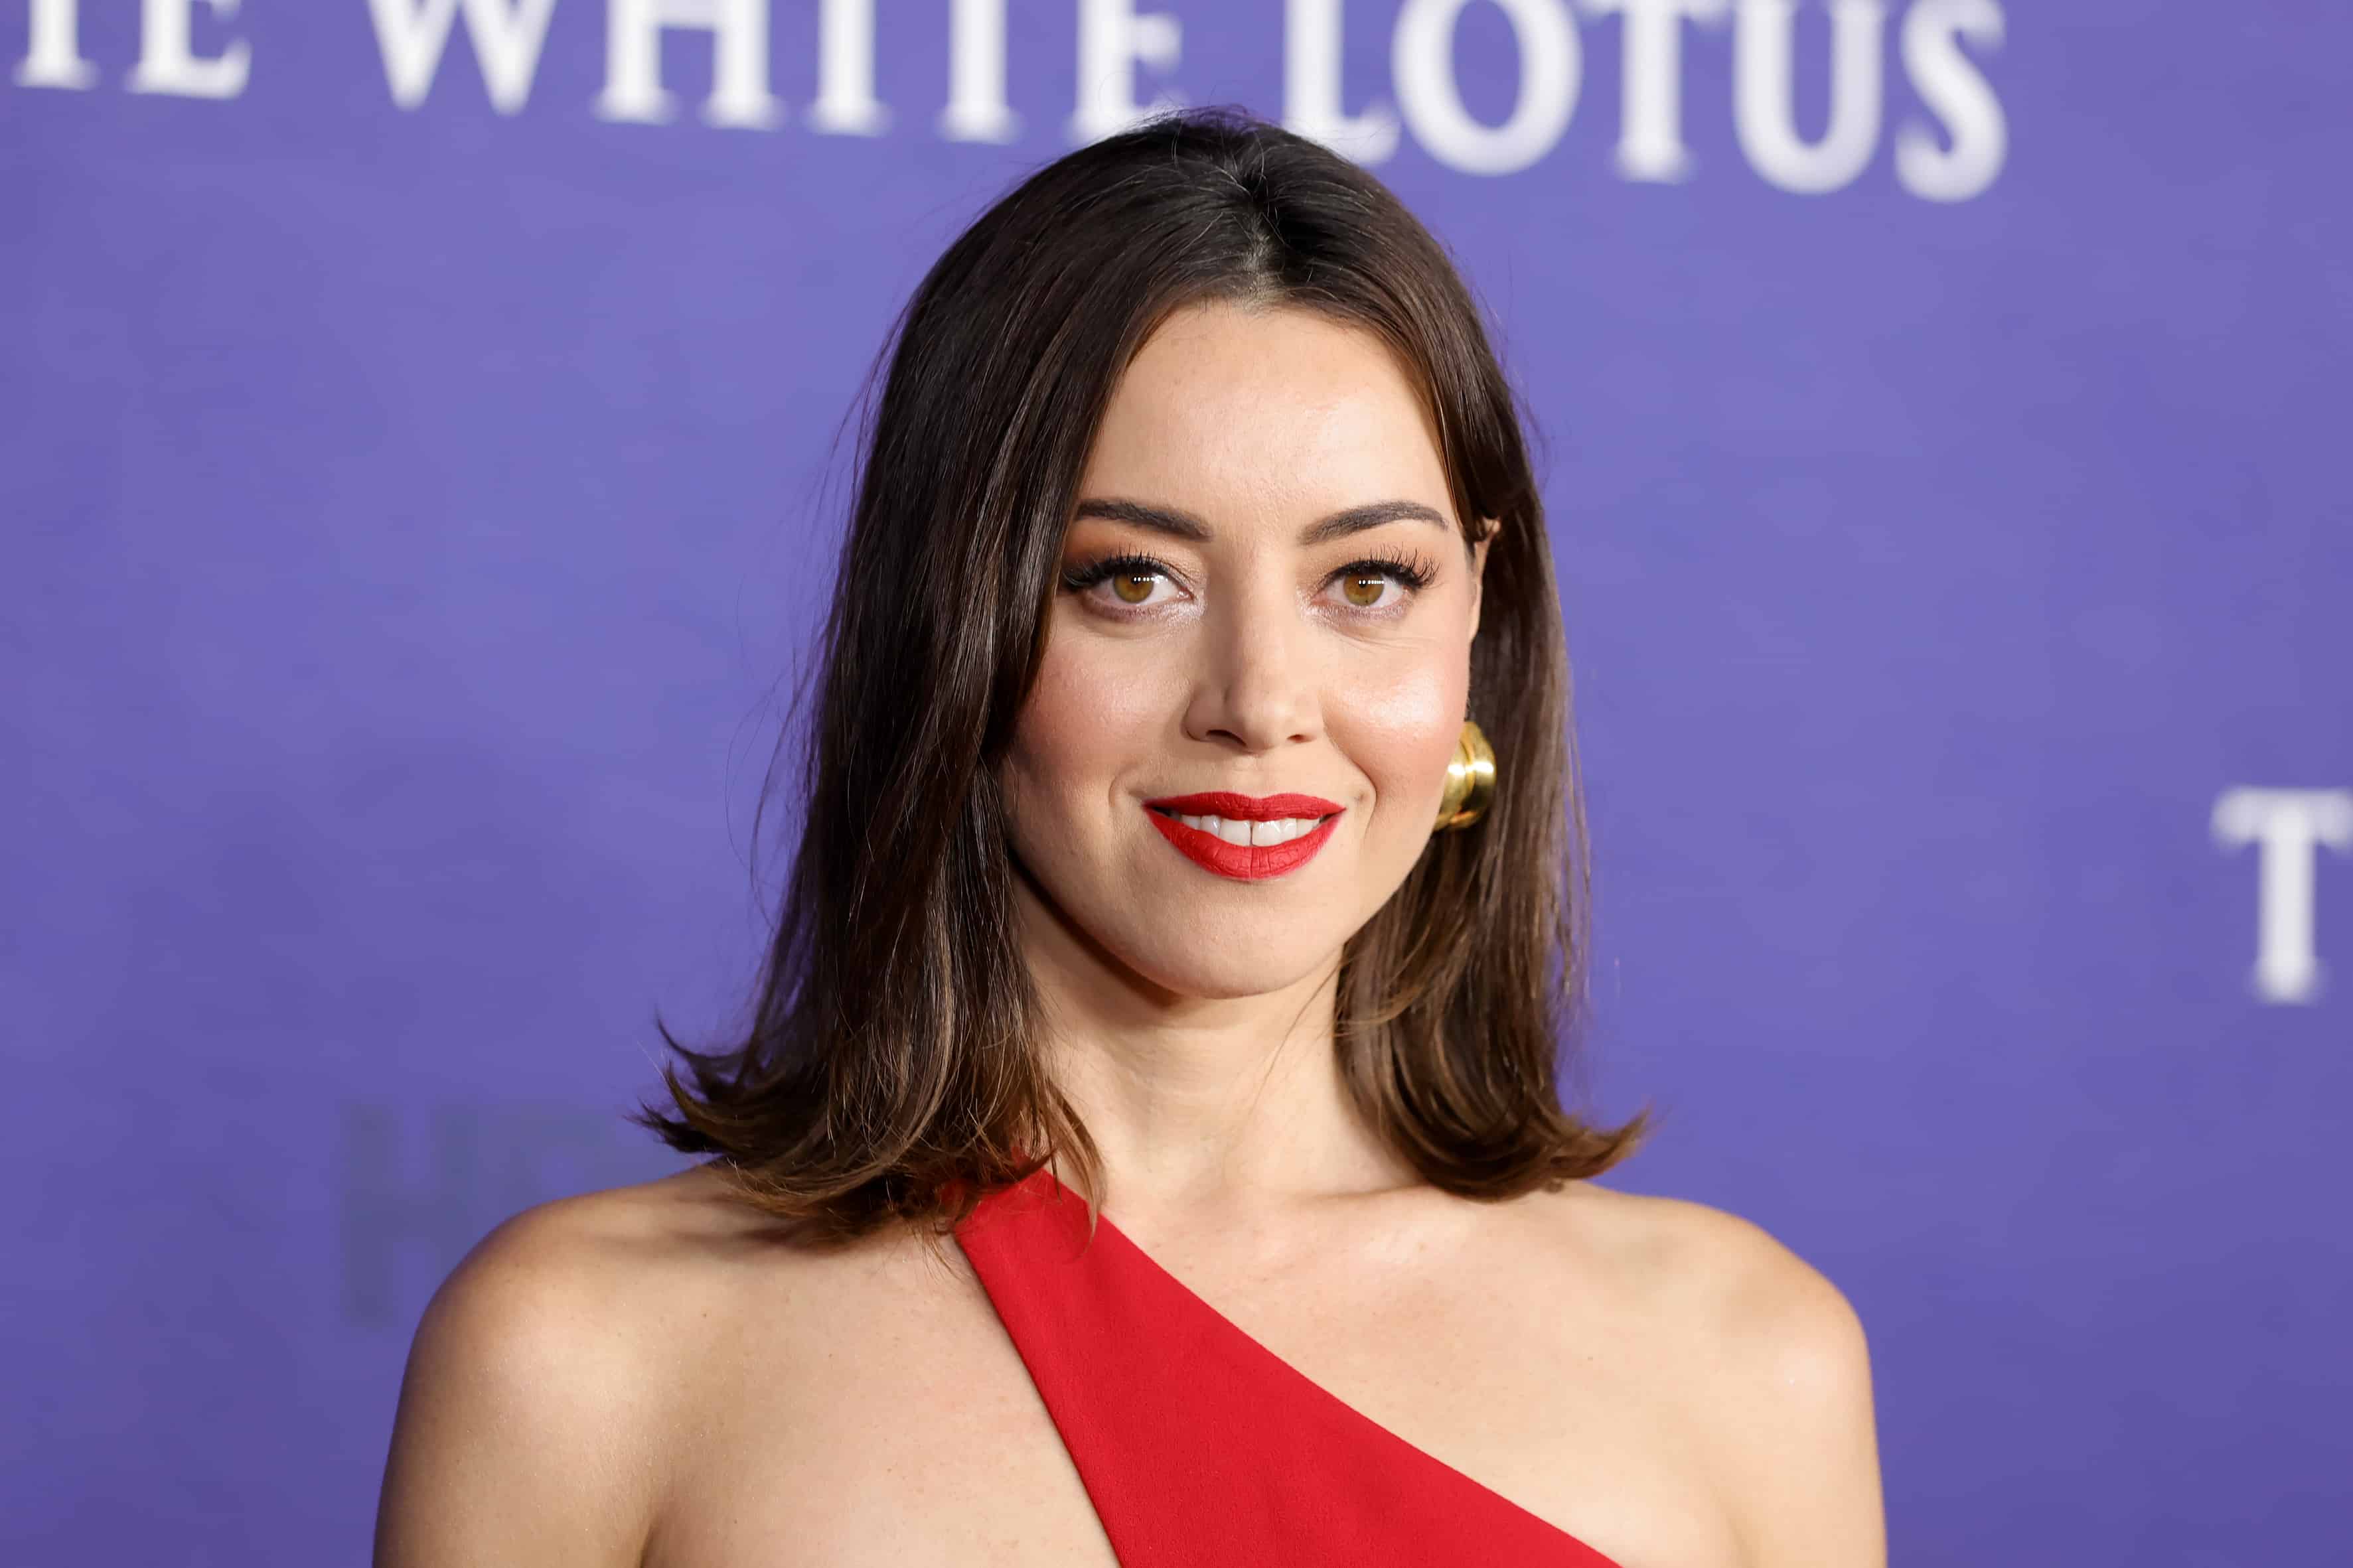 Aubrey Plaza is Finally Hosting ‘Saturday Night Live’ — Here’s What We Know